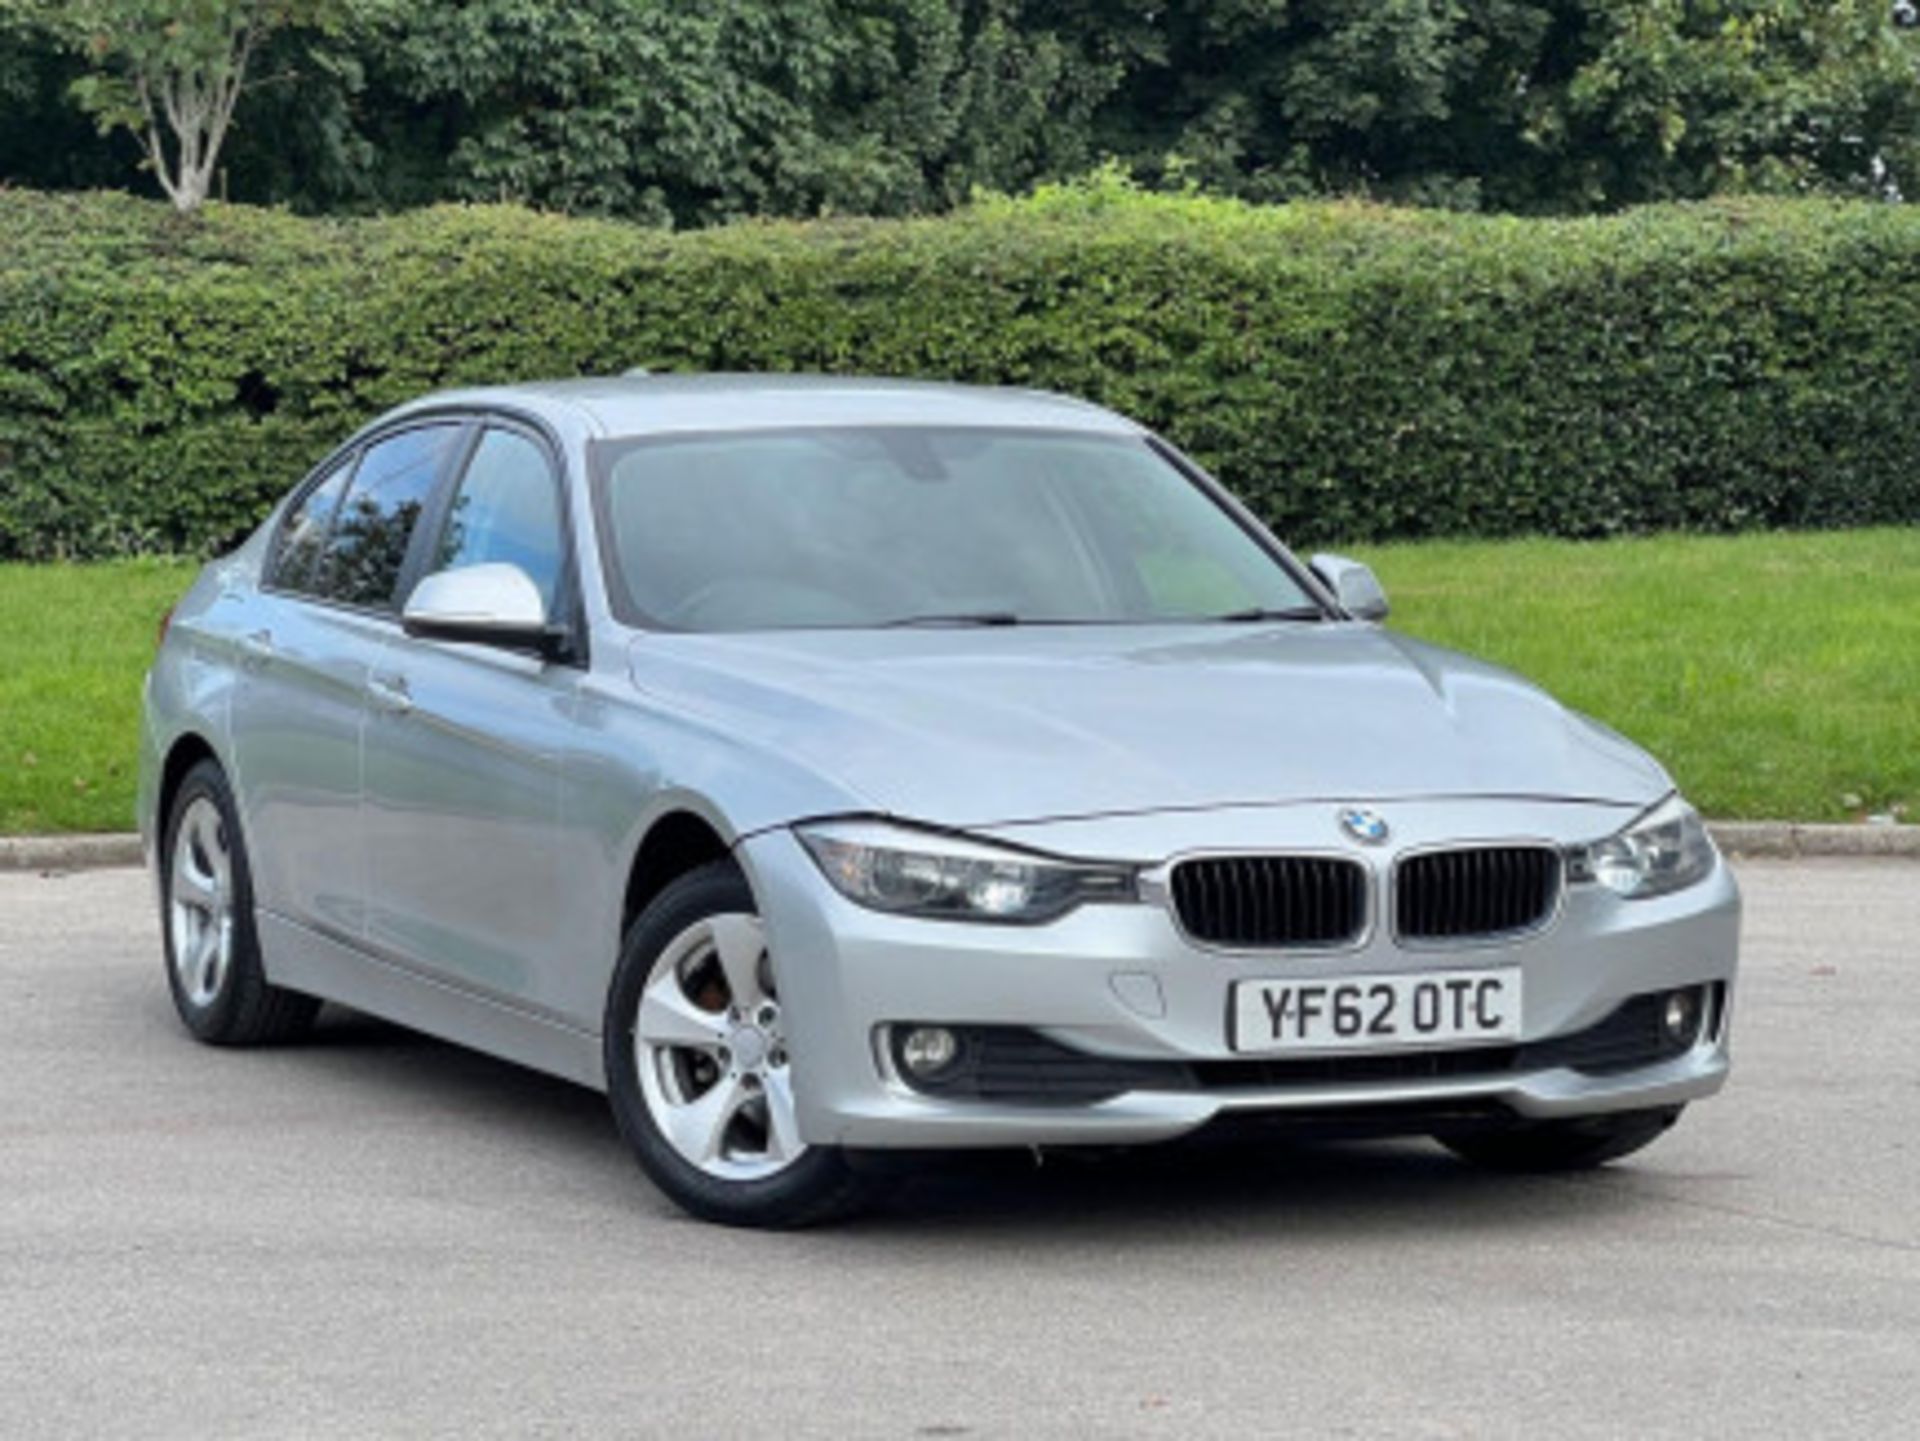 BMW 3 SERIES 2.0 DIESEL ED START STOP - A WELL-MAINTAINED GEM >>--NO VAT ON HAMMER--<< - Image 138 of 229